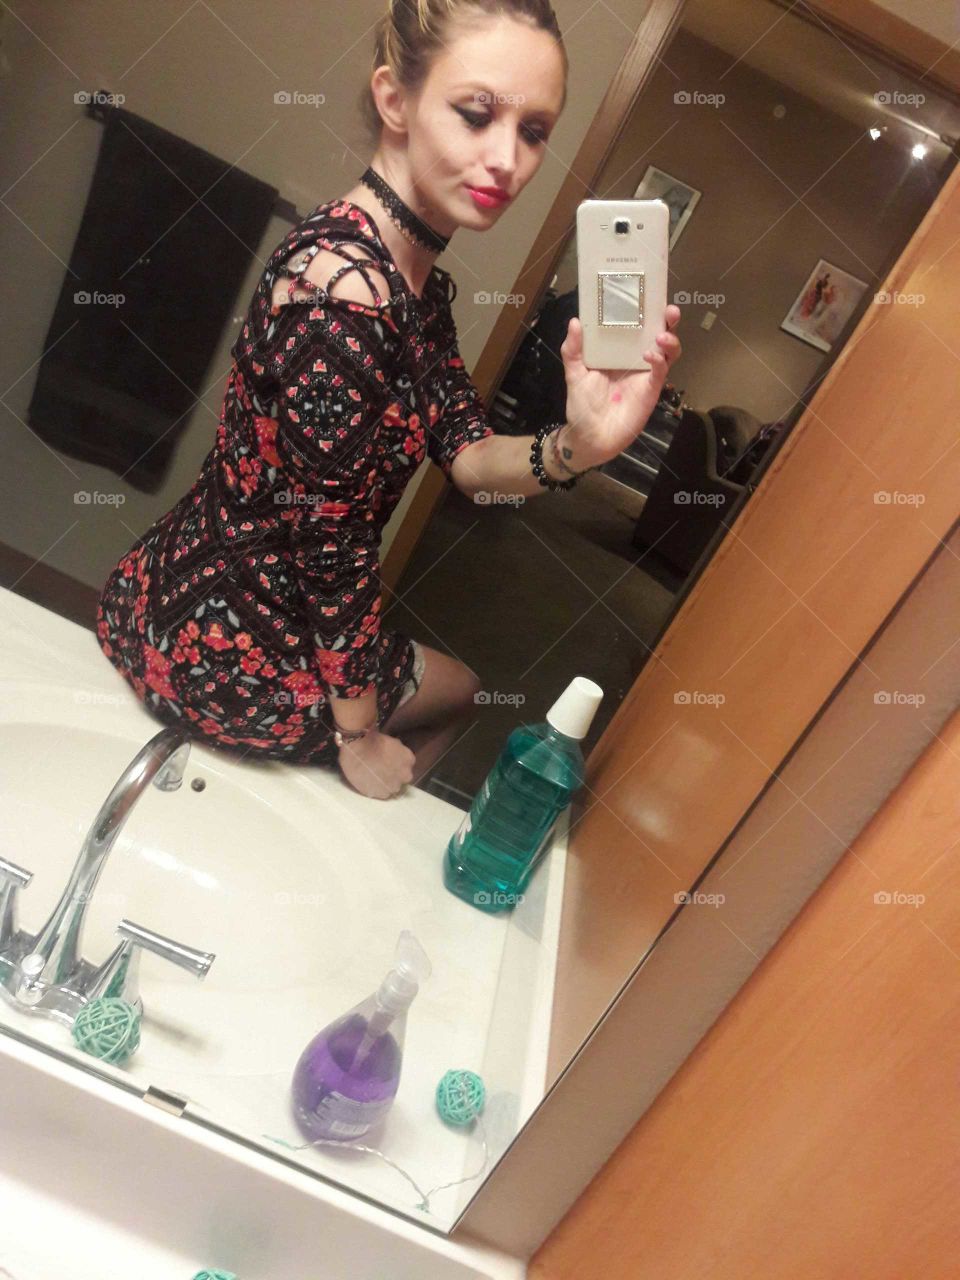 I decided to take a "classy" sink selfie to show my new dress off.